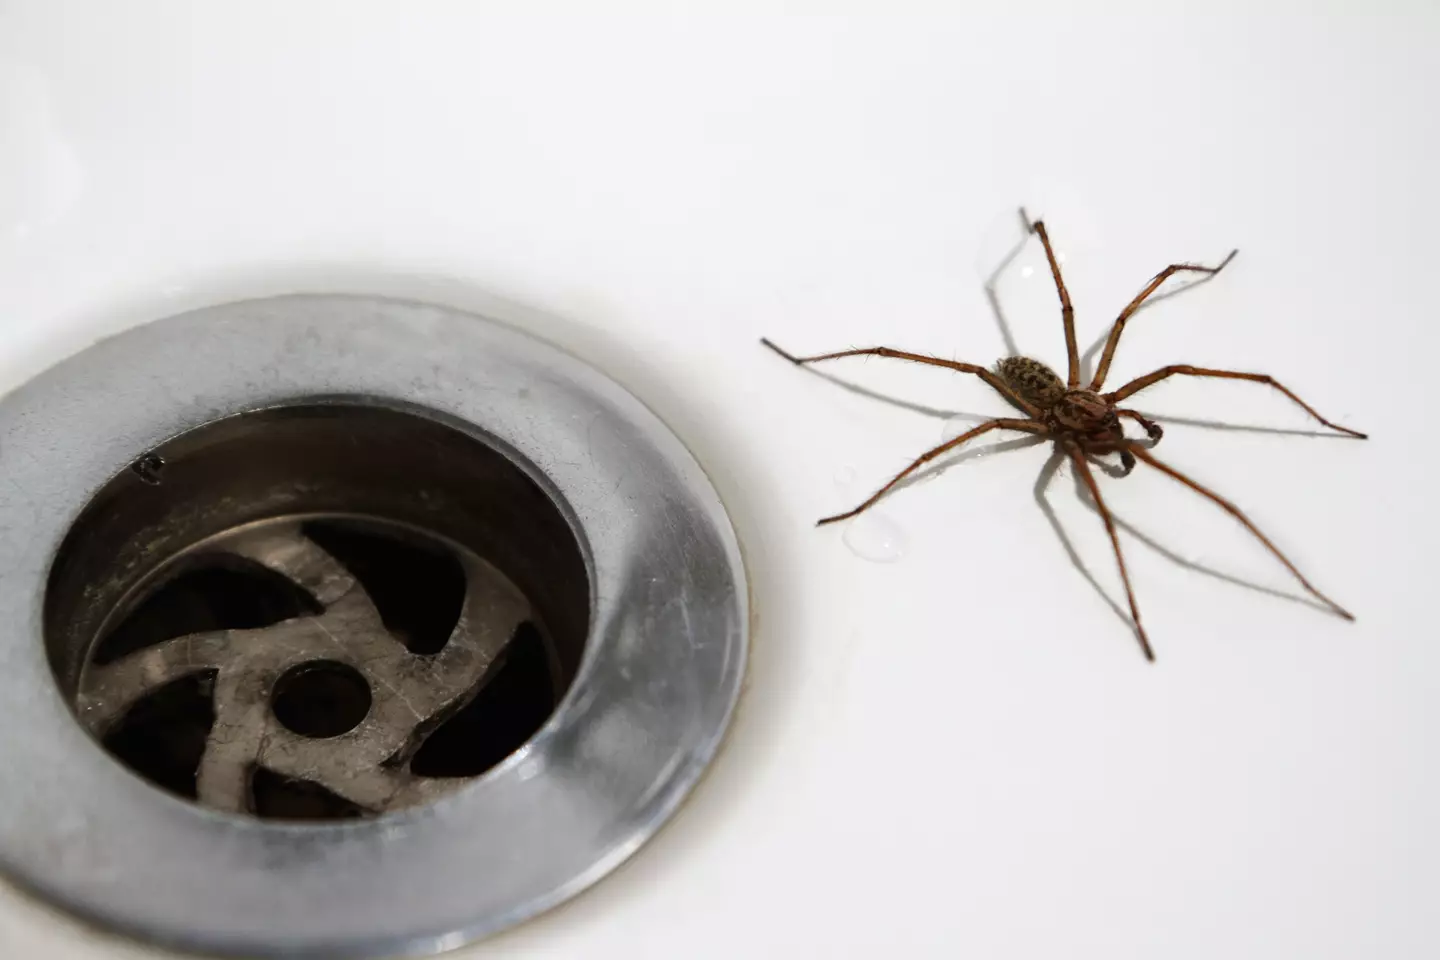 Fear of spiders is one of the most common phobias in the UK.